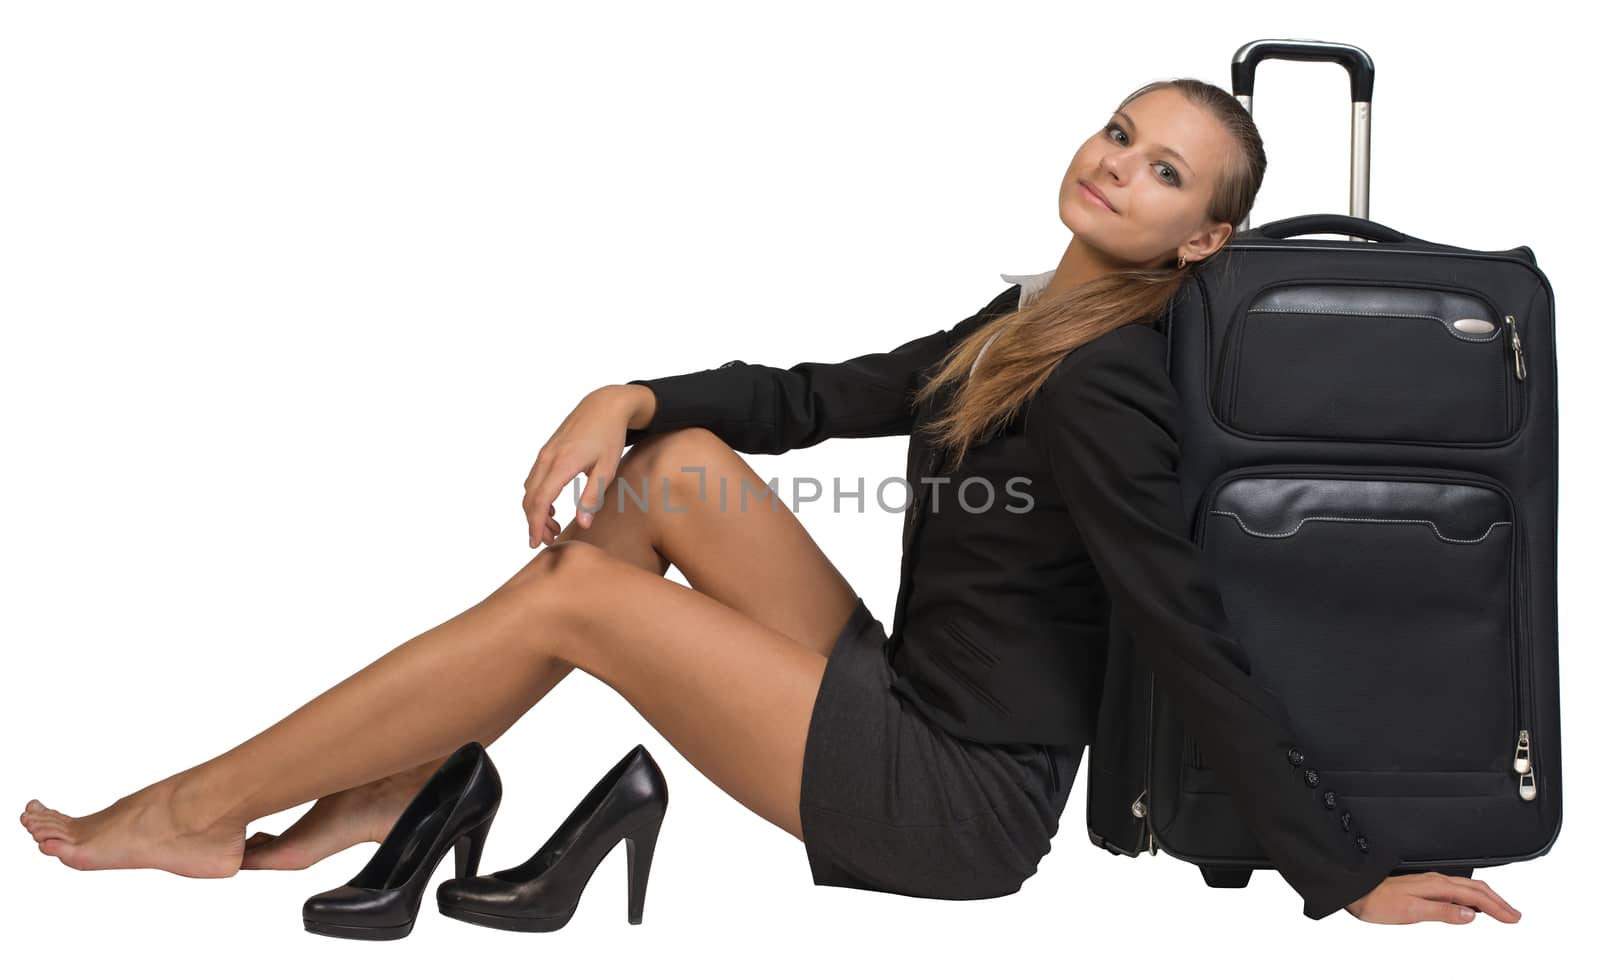 Businesswoman with her shoes off sitting hand resting on the floor, next to front view suitcase with extended handle, looking at camera. Isolated over white background